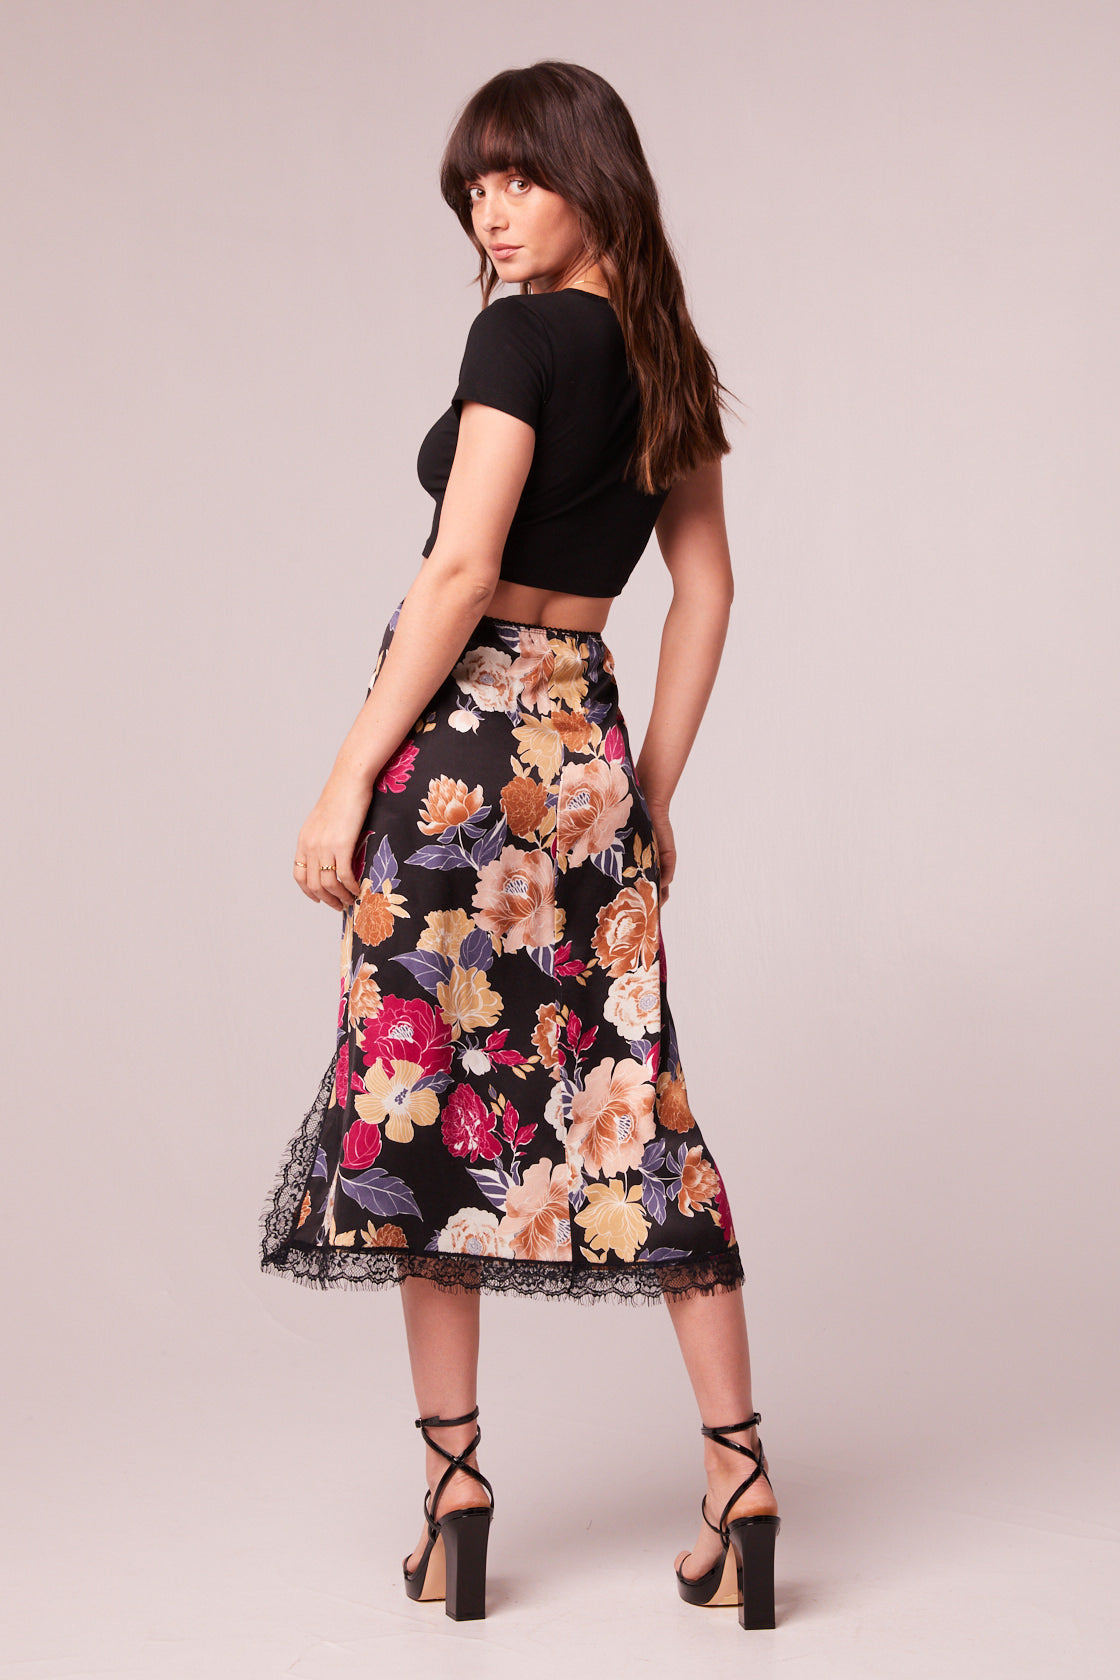 Lilou Black Floral Lace band - free of Skirt the Midi Slip